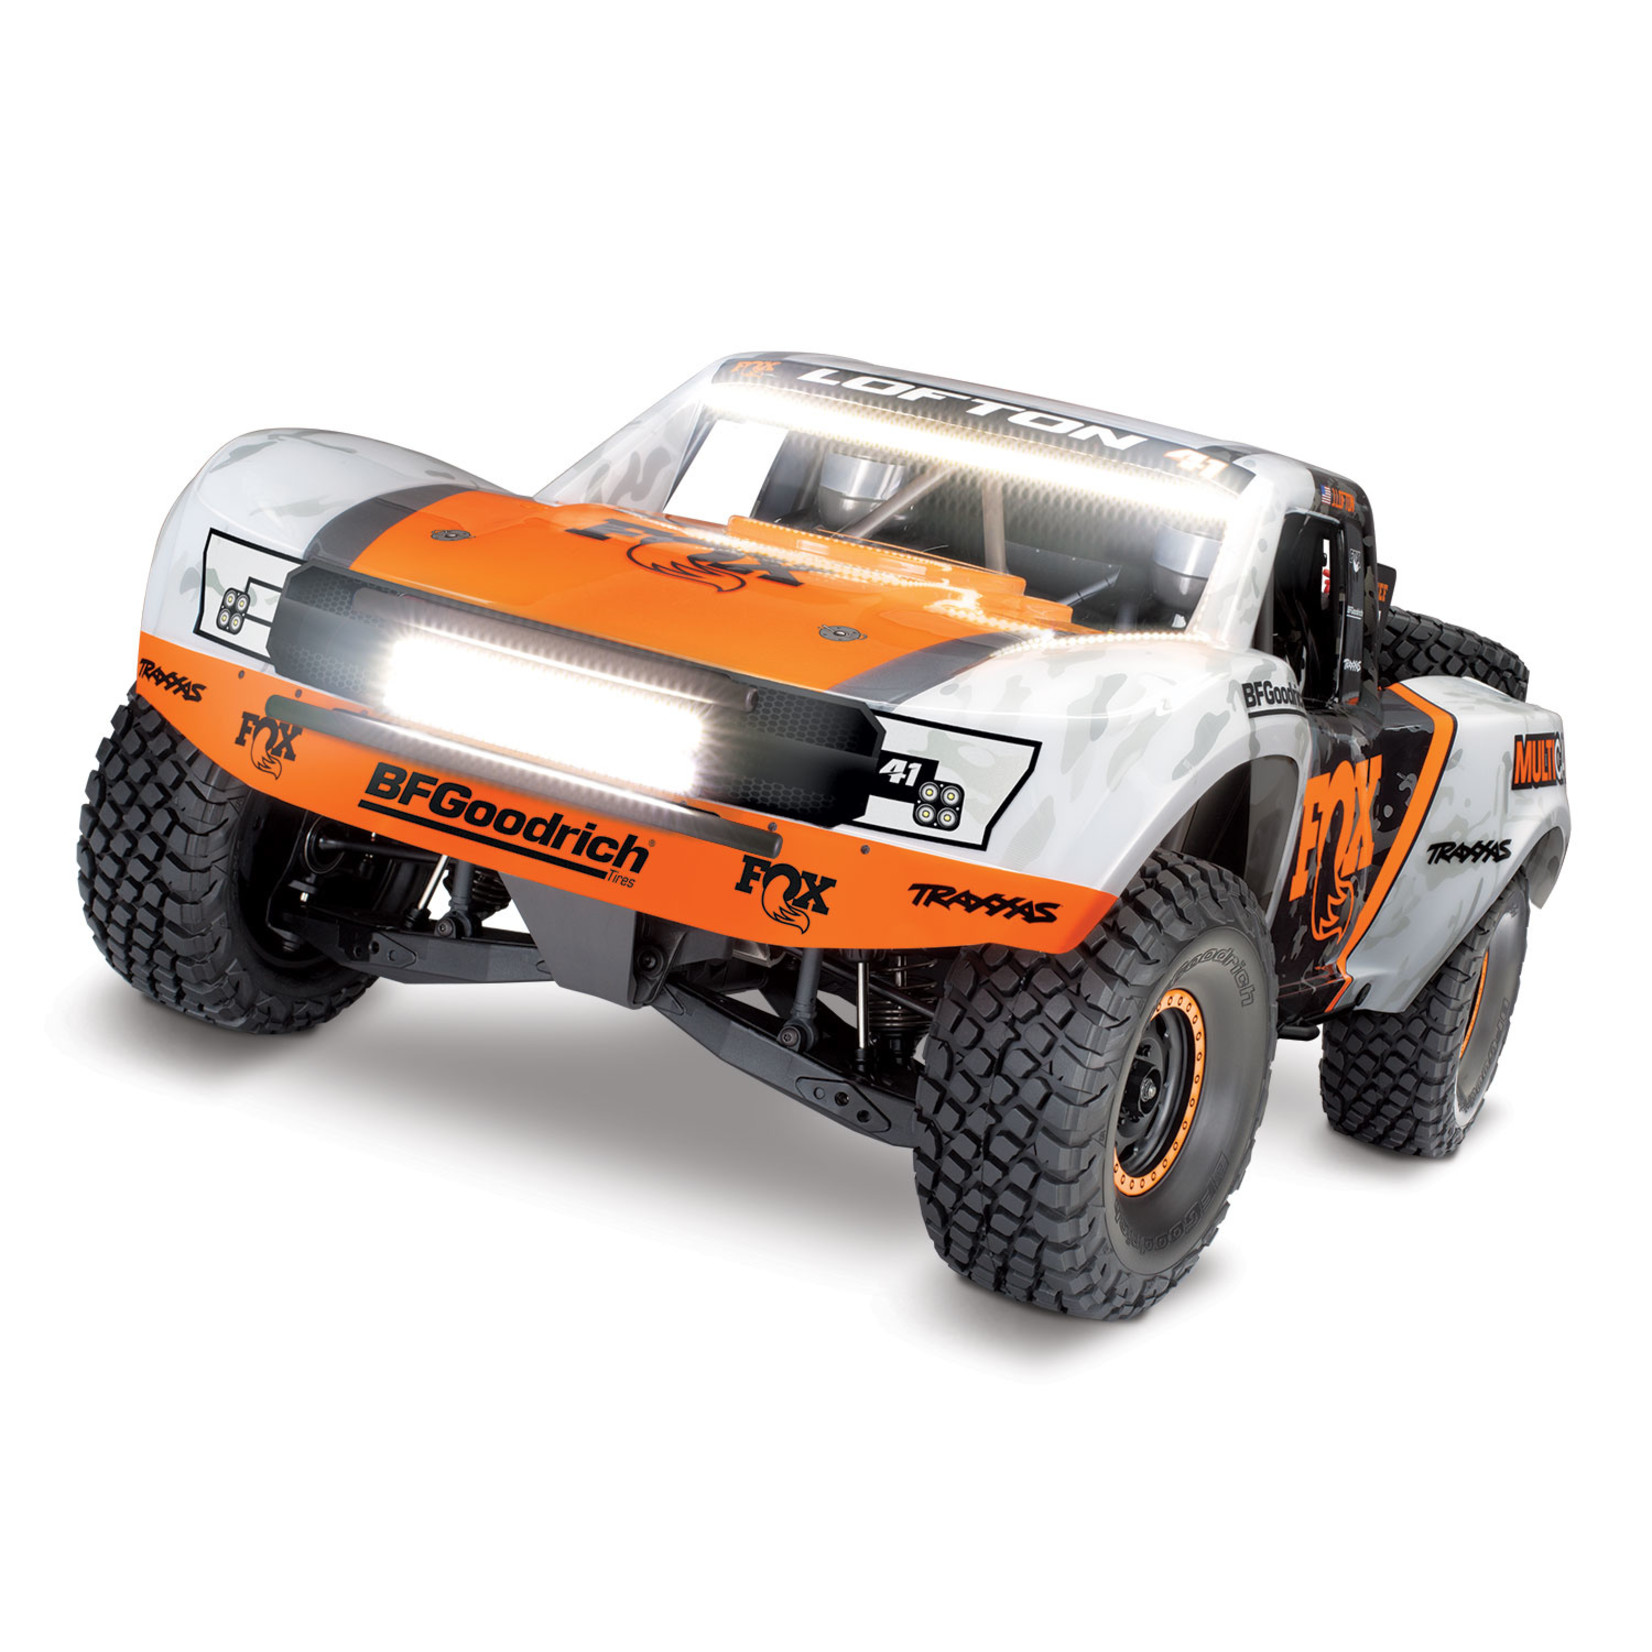 Traxxas Unlimited Desert Racer: Pro-Scale 4WD Brushless Electric Race Truck with Traxxas Stability Management (TSM) and LED lights